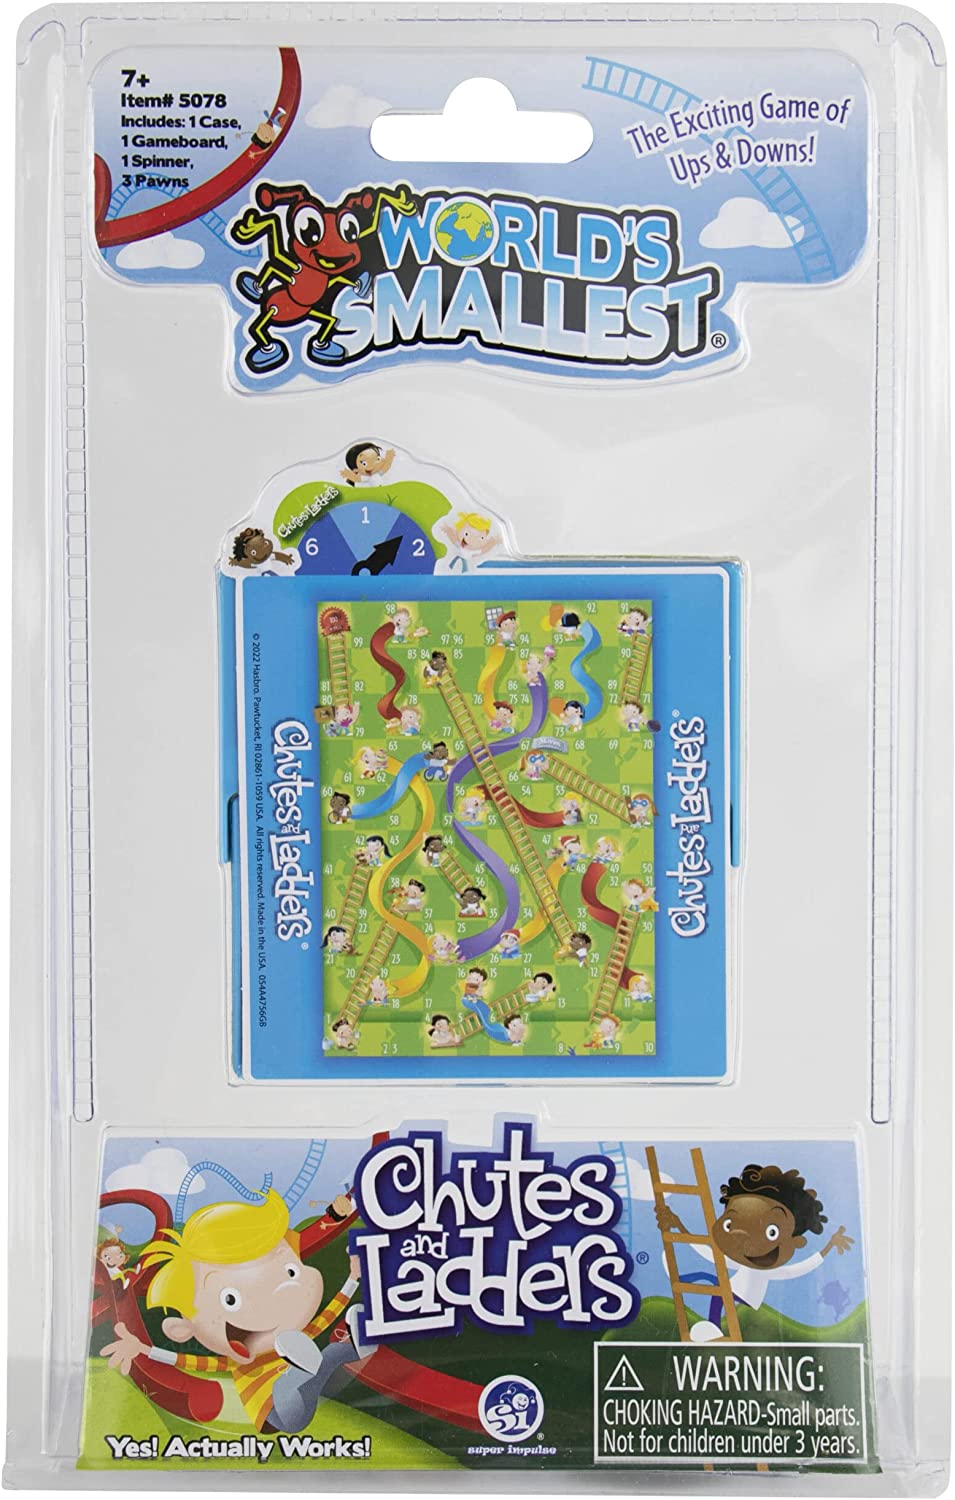 Toy World's Smallest Chutes And Ladders-hotRAGS.com